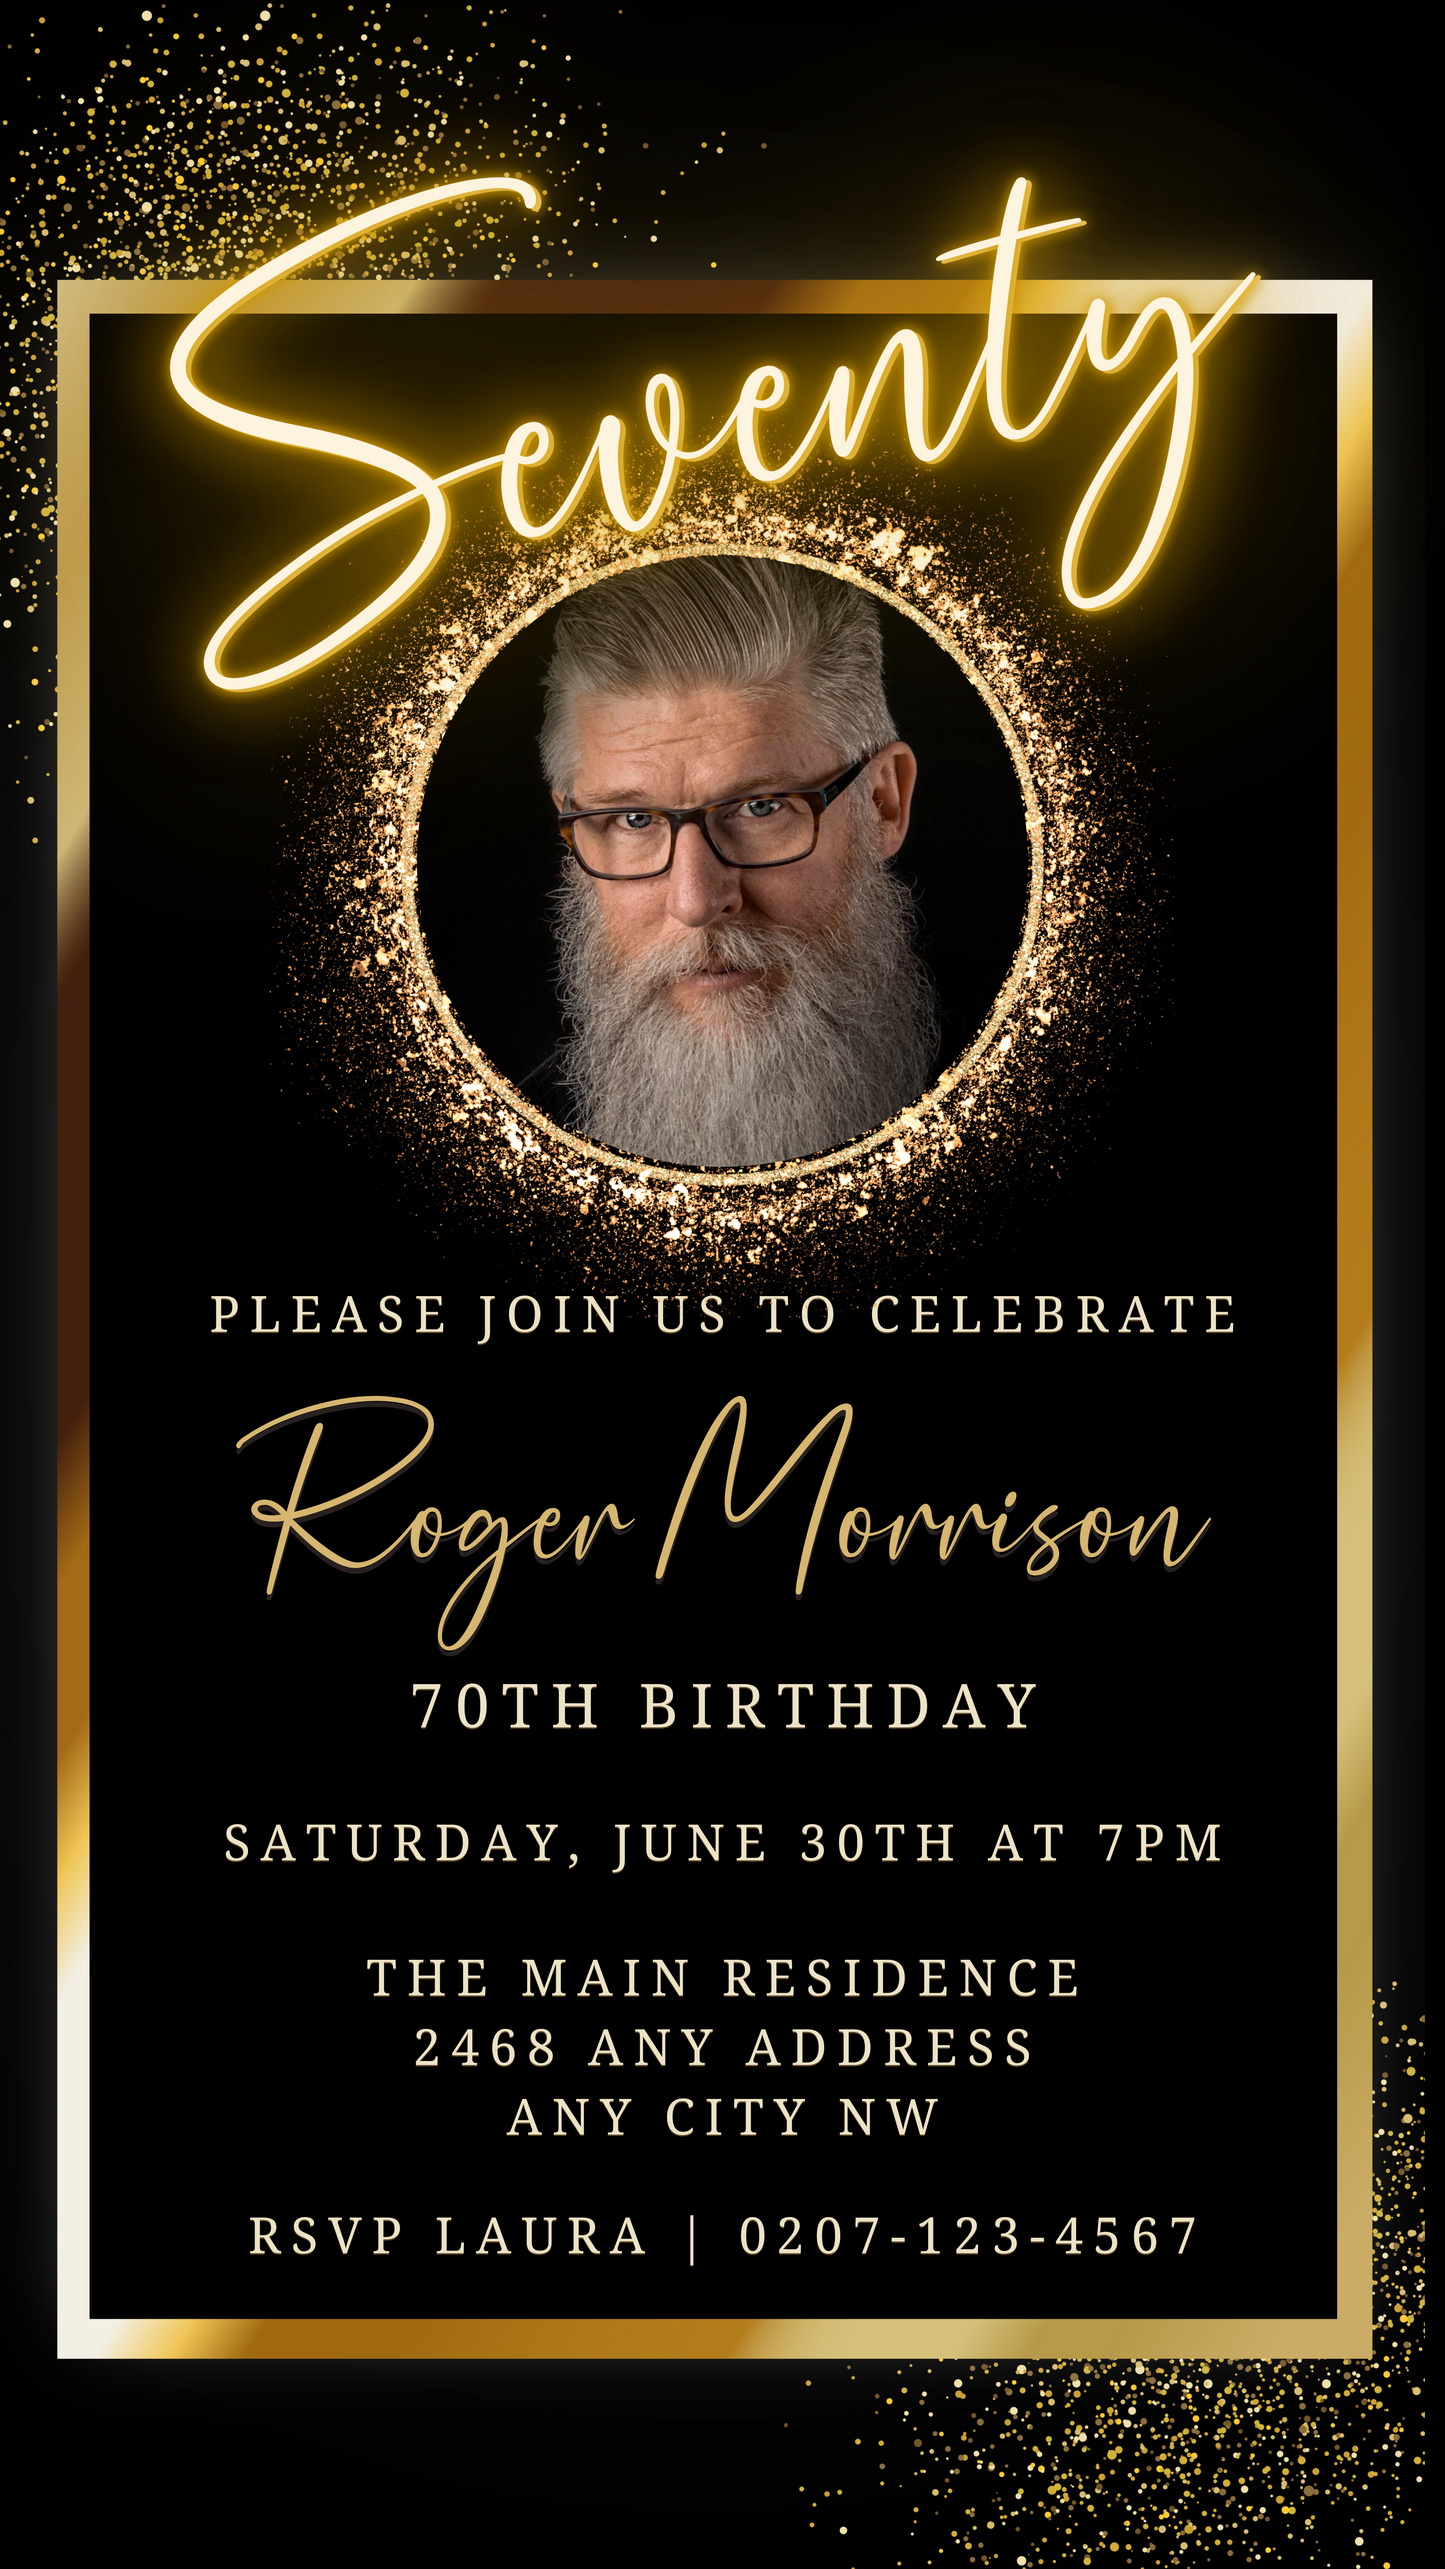 Man with a beard and glasses displayed in a customizable Digital Neon Gold Oval Photo Frame for a 70th Birthday Evite.